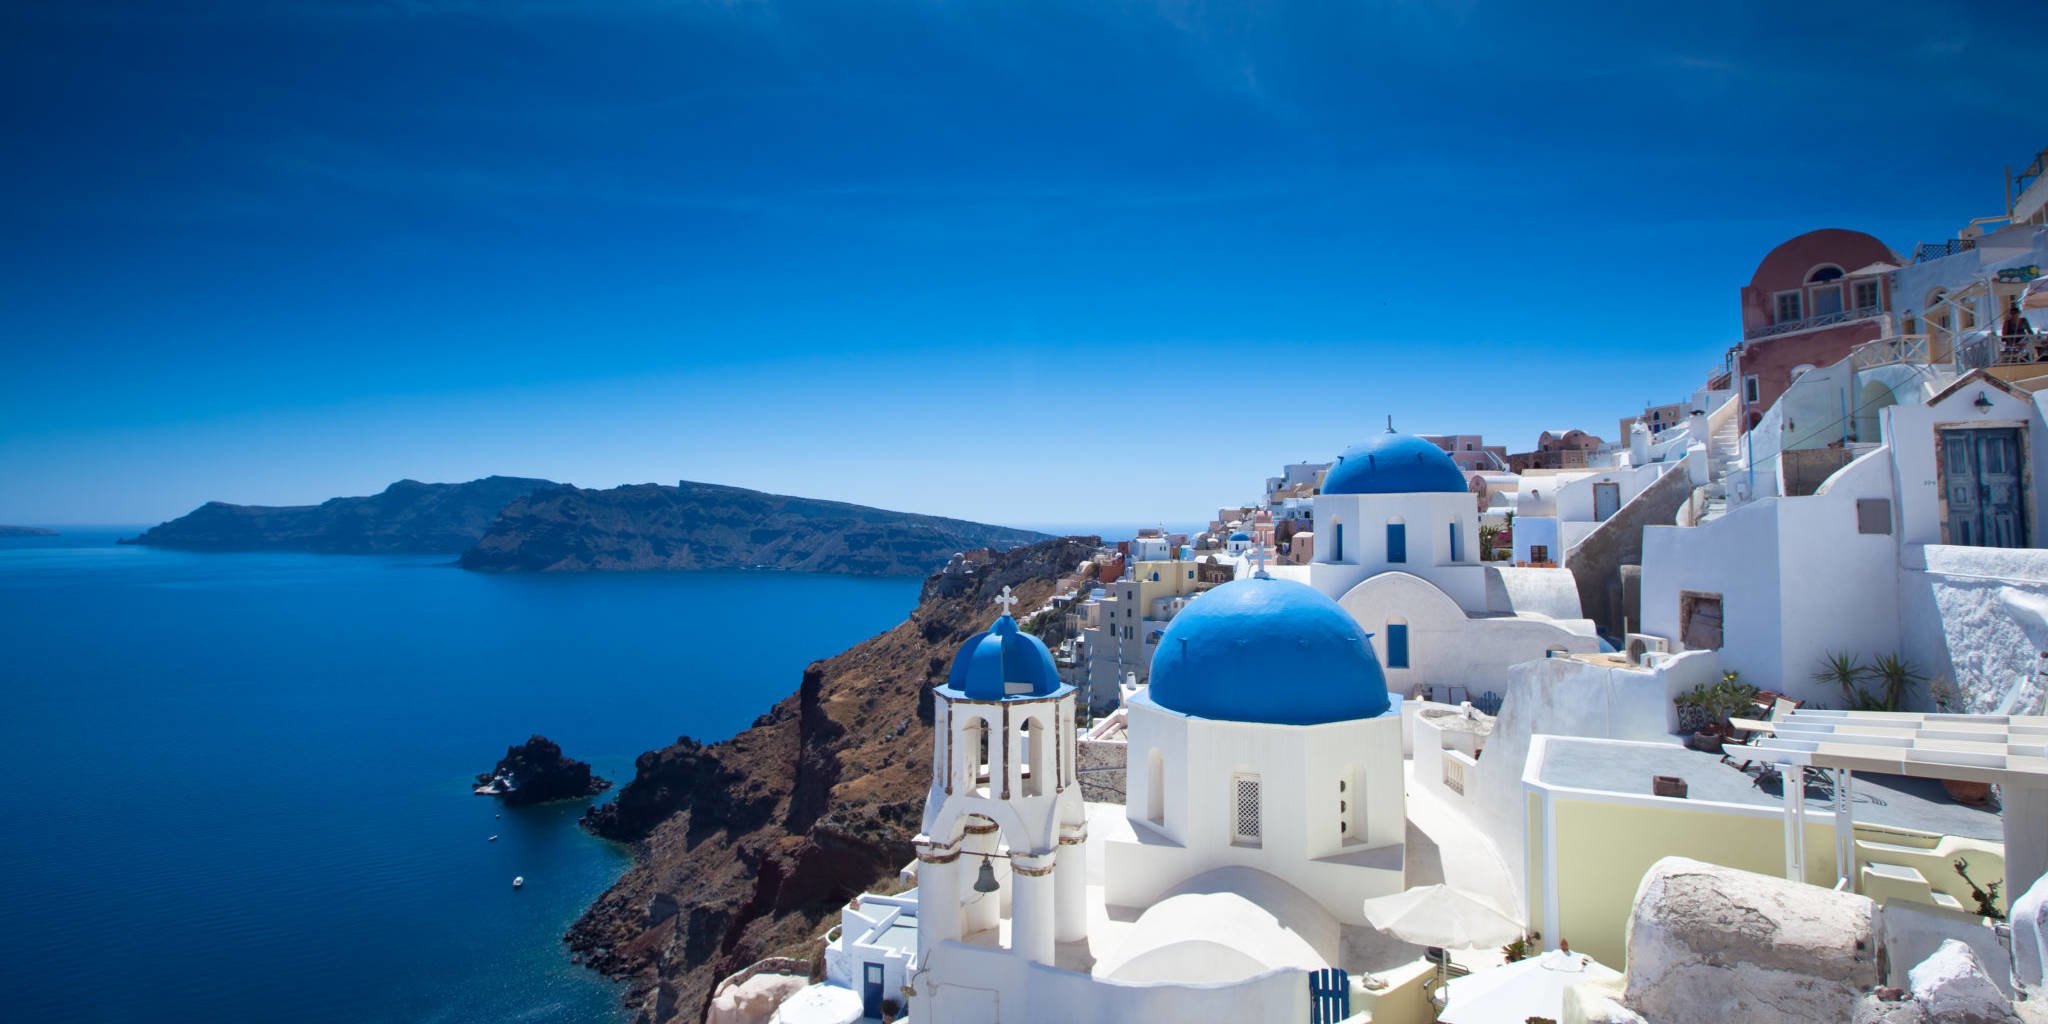 The Many Wonders of a Mediterranean Cruise